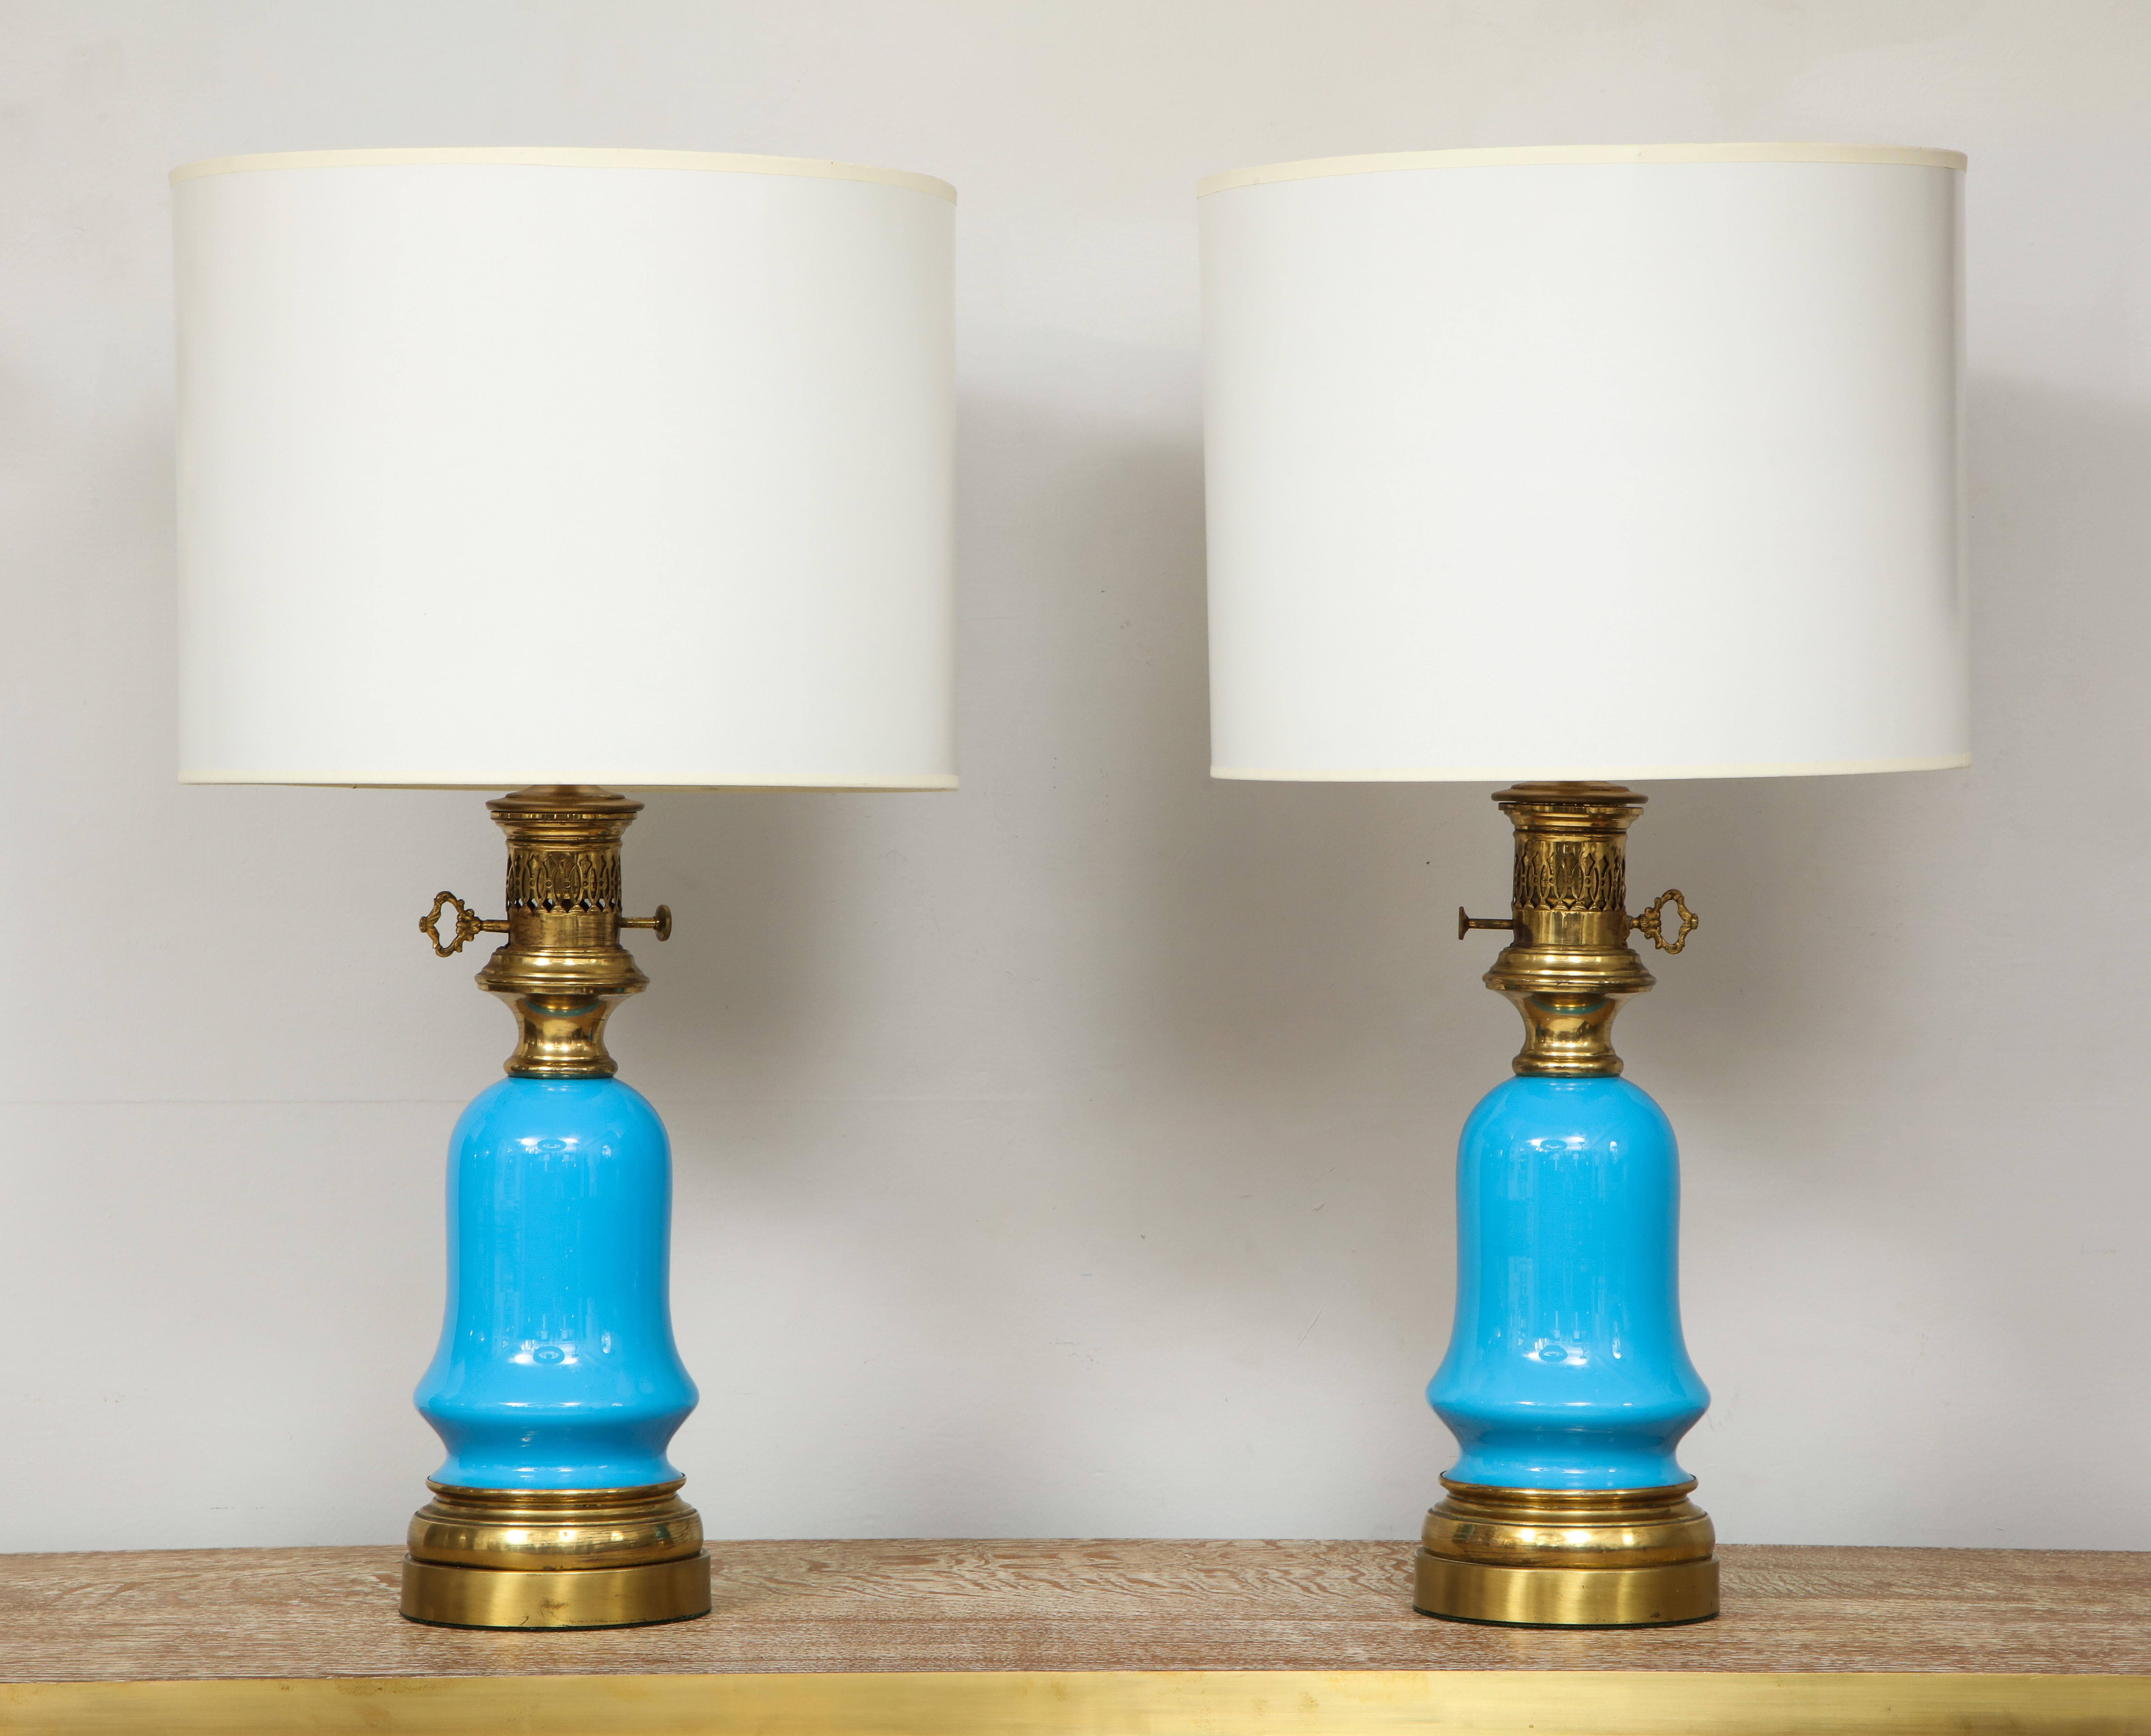 Pair of blue opaline glass lamps. The shades are not included.